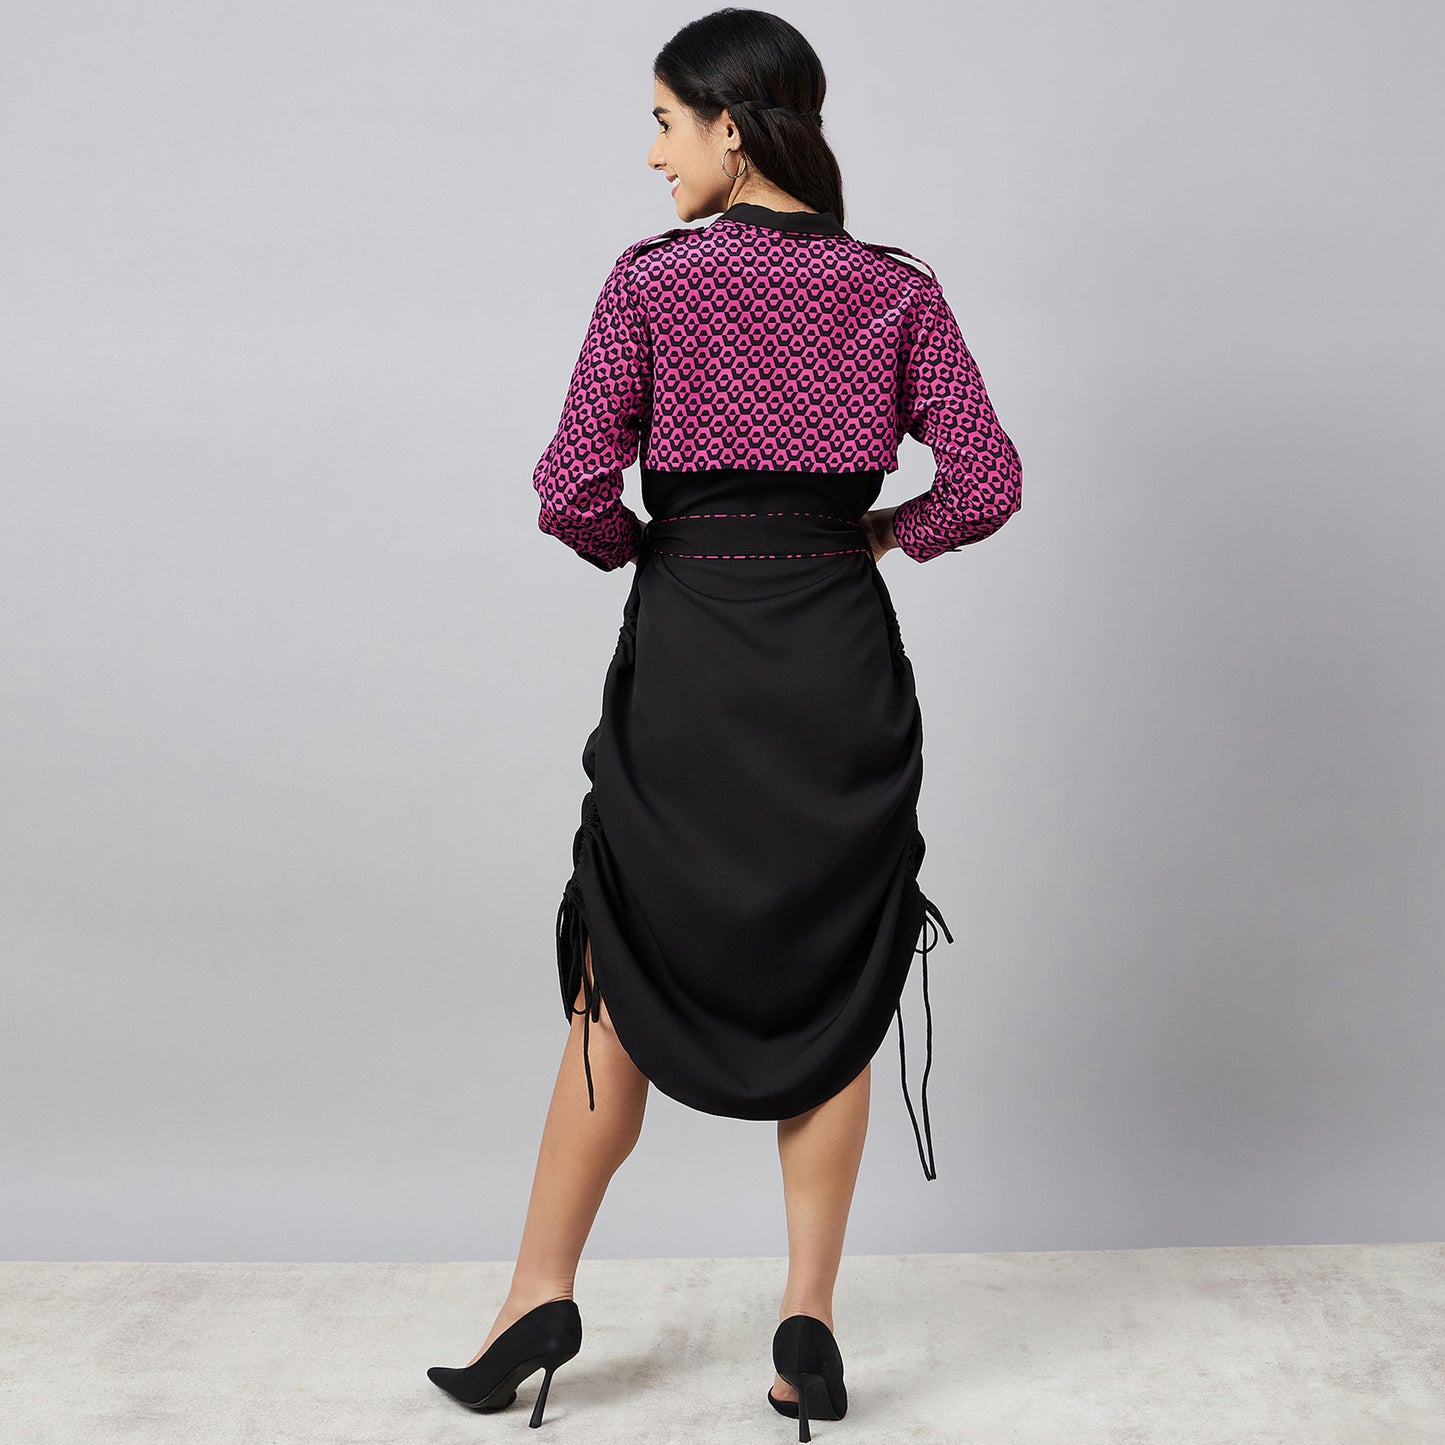 Black and Pink Houndstooth Print Shirt Dress with Belt